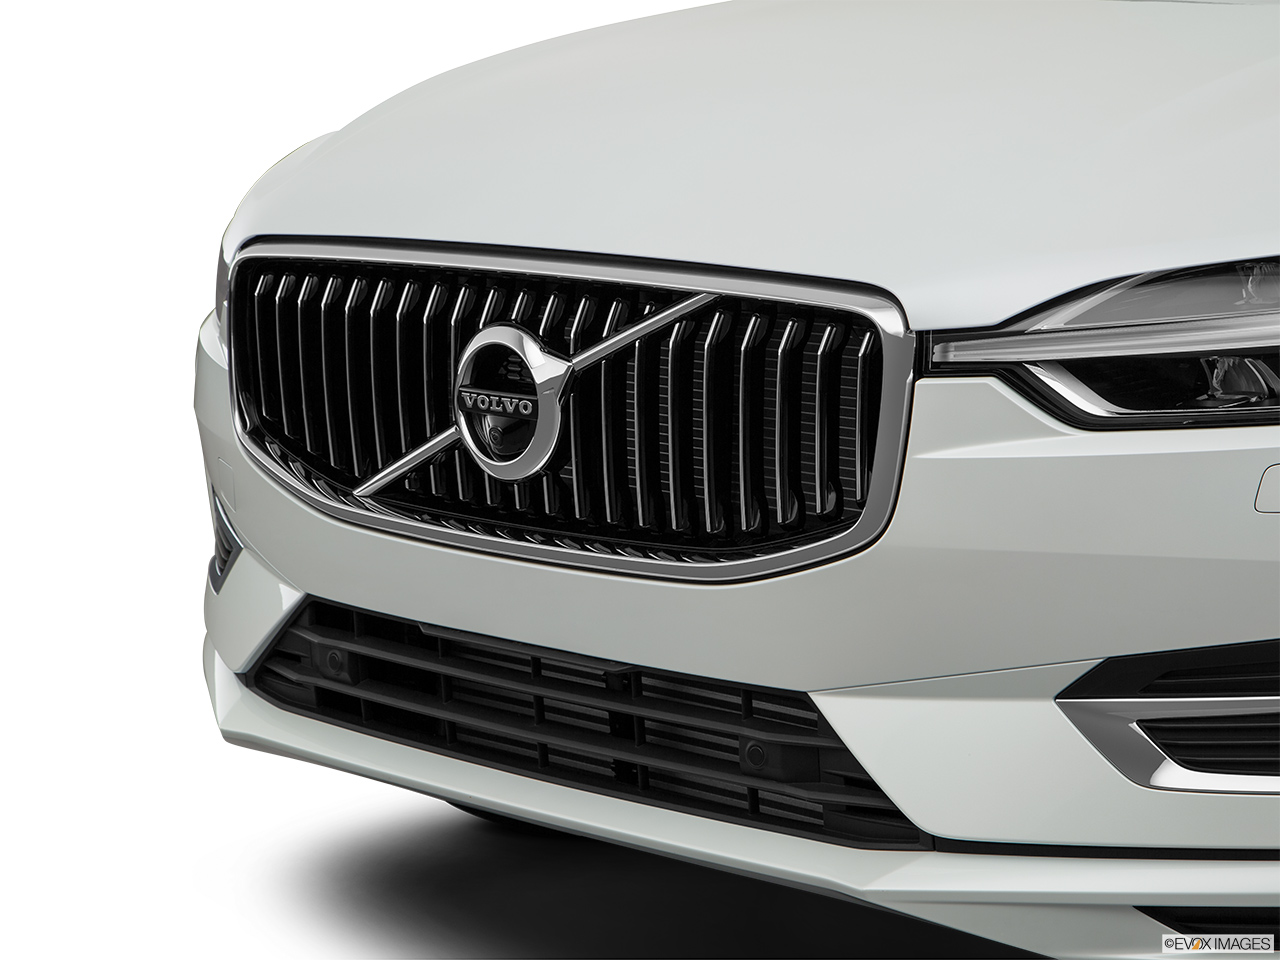 2019 Volvo XC60 T8 Inscription eAWD Plug-in Hybrid Close up of Grill. 